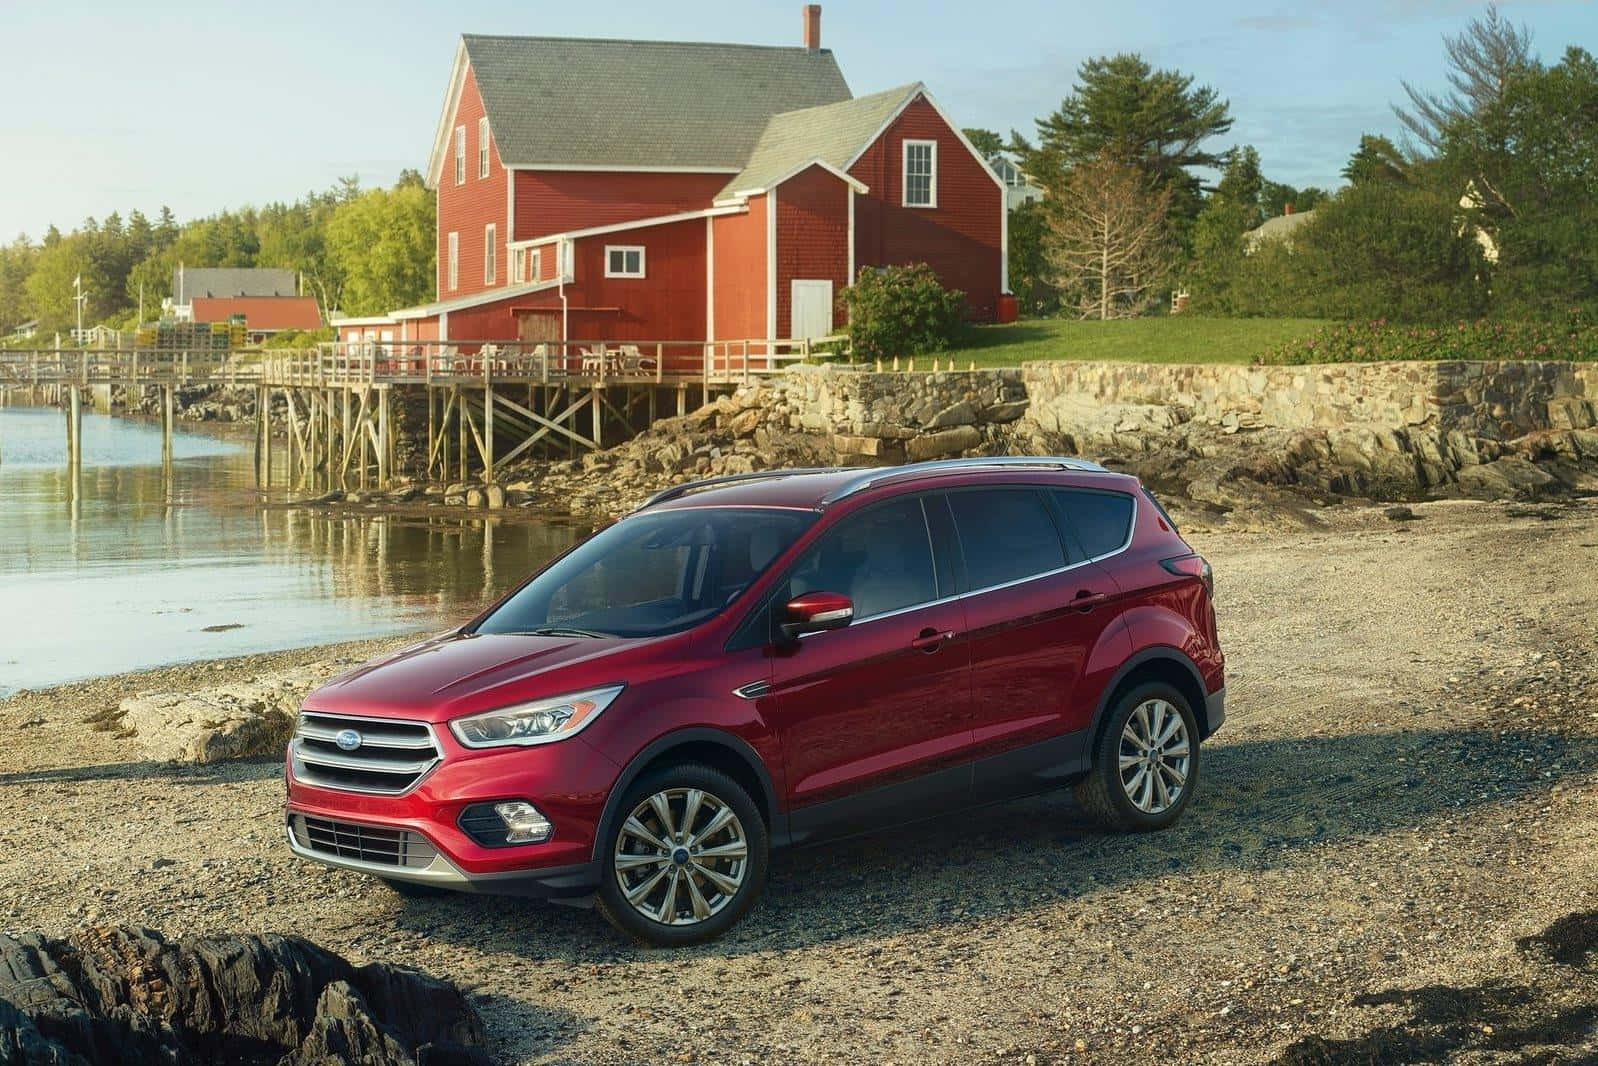 Stylish Ford Escape on the Road Wallpaper